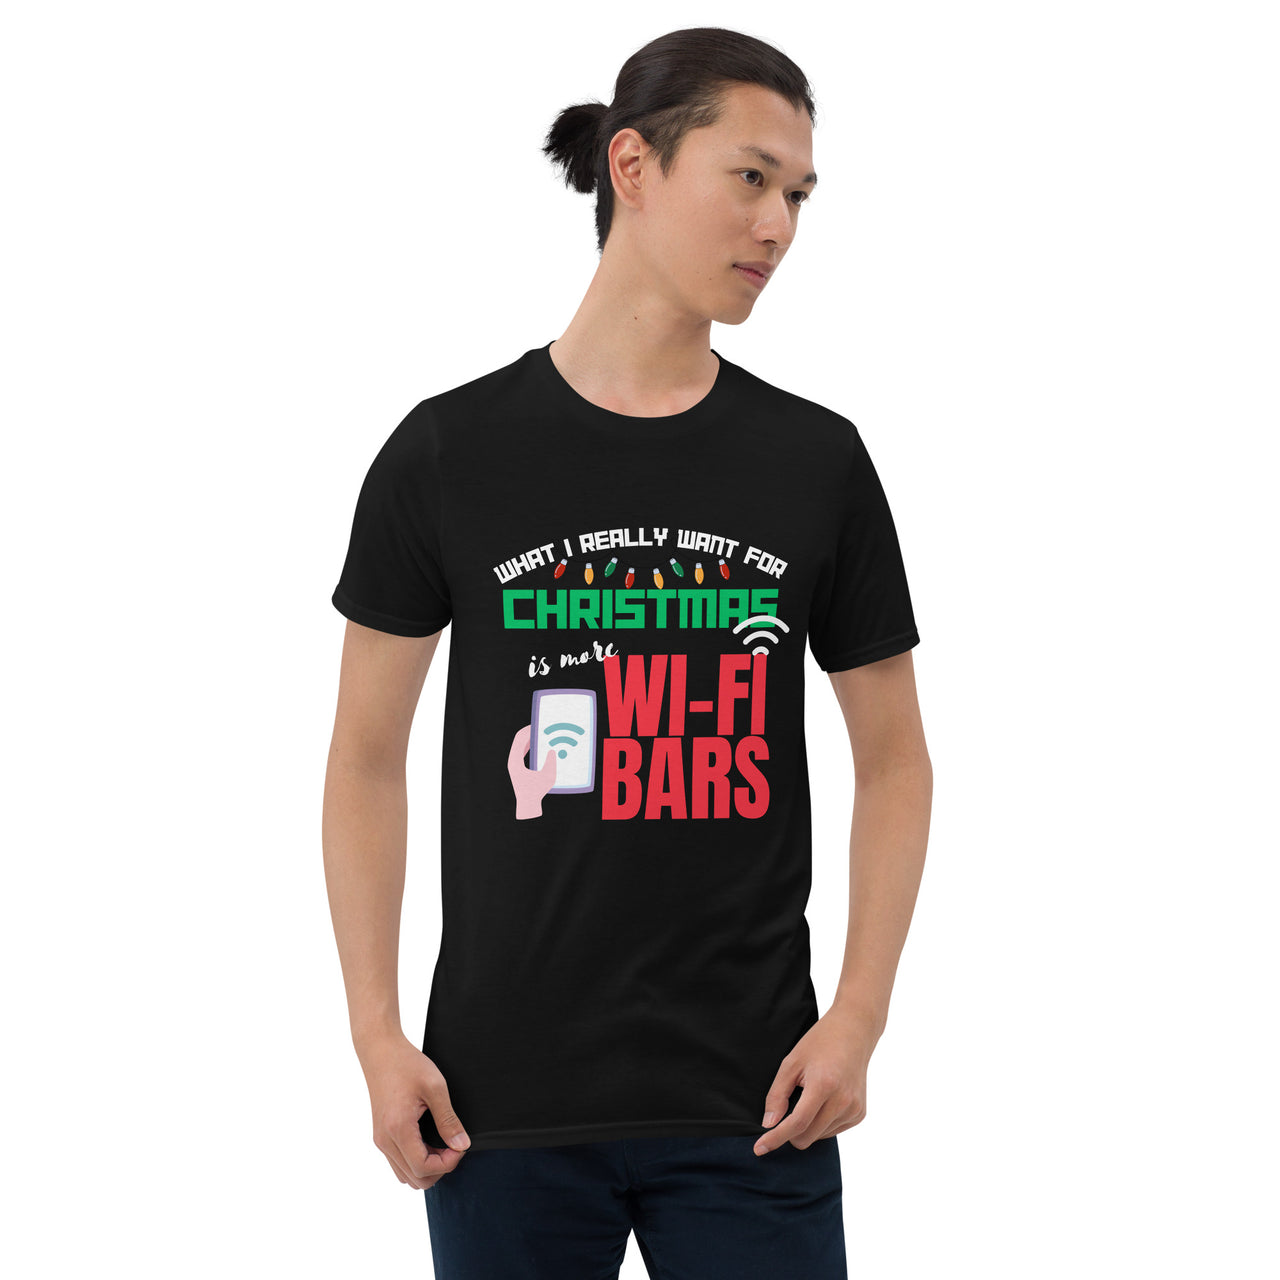 More Wi-Fi Bars for Holiday Connectivity T-Shirt